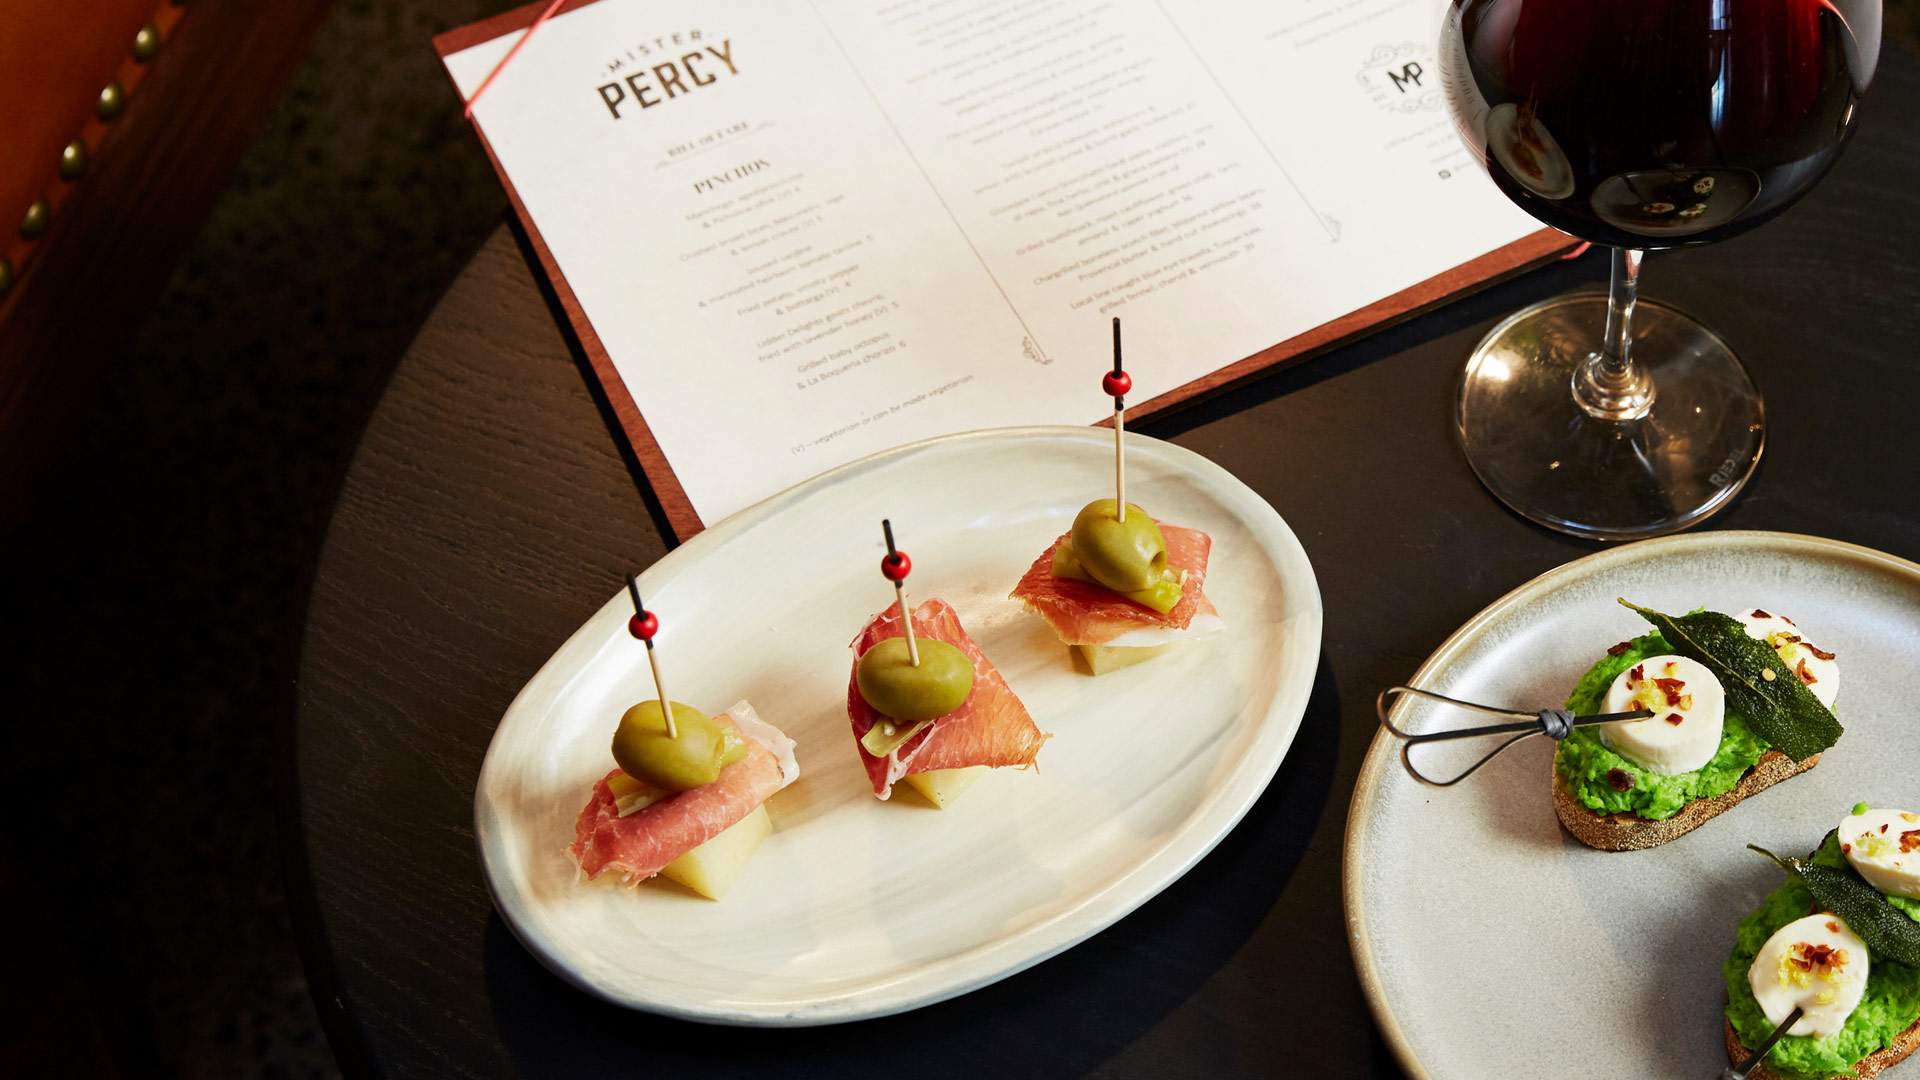 Mister Percy Is Pyrmont's New Mediterranean Wine Bar Located in a Former Wool Store